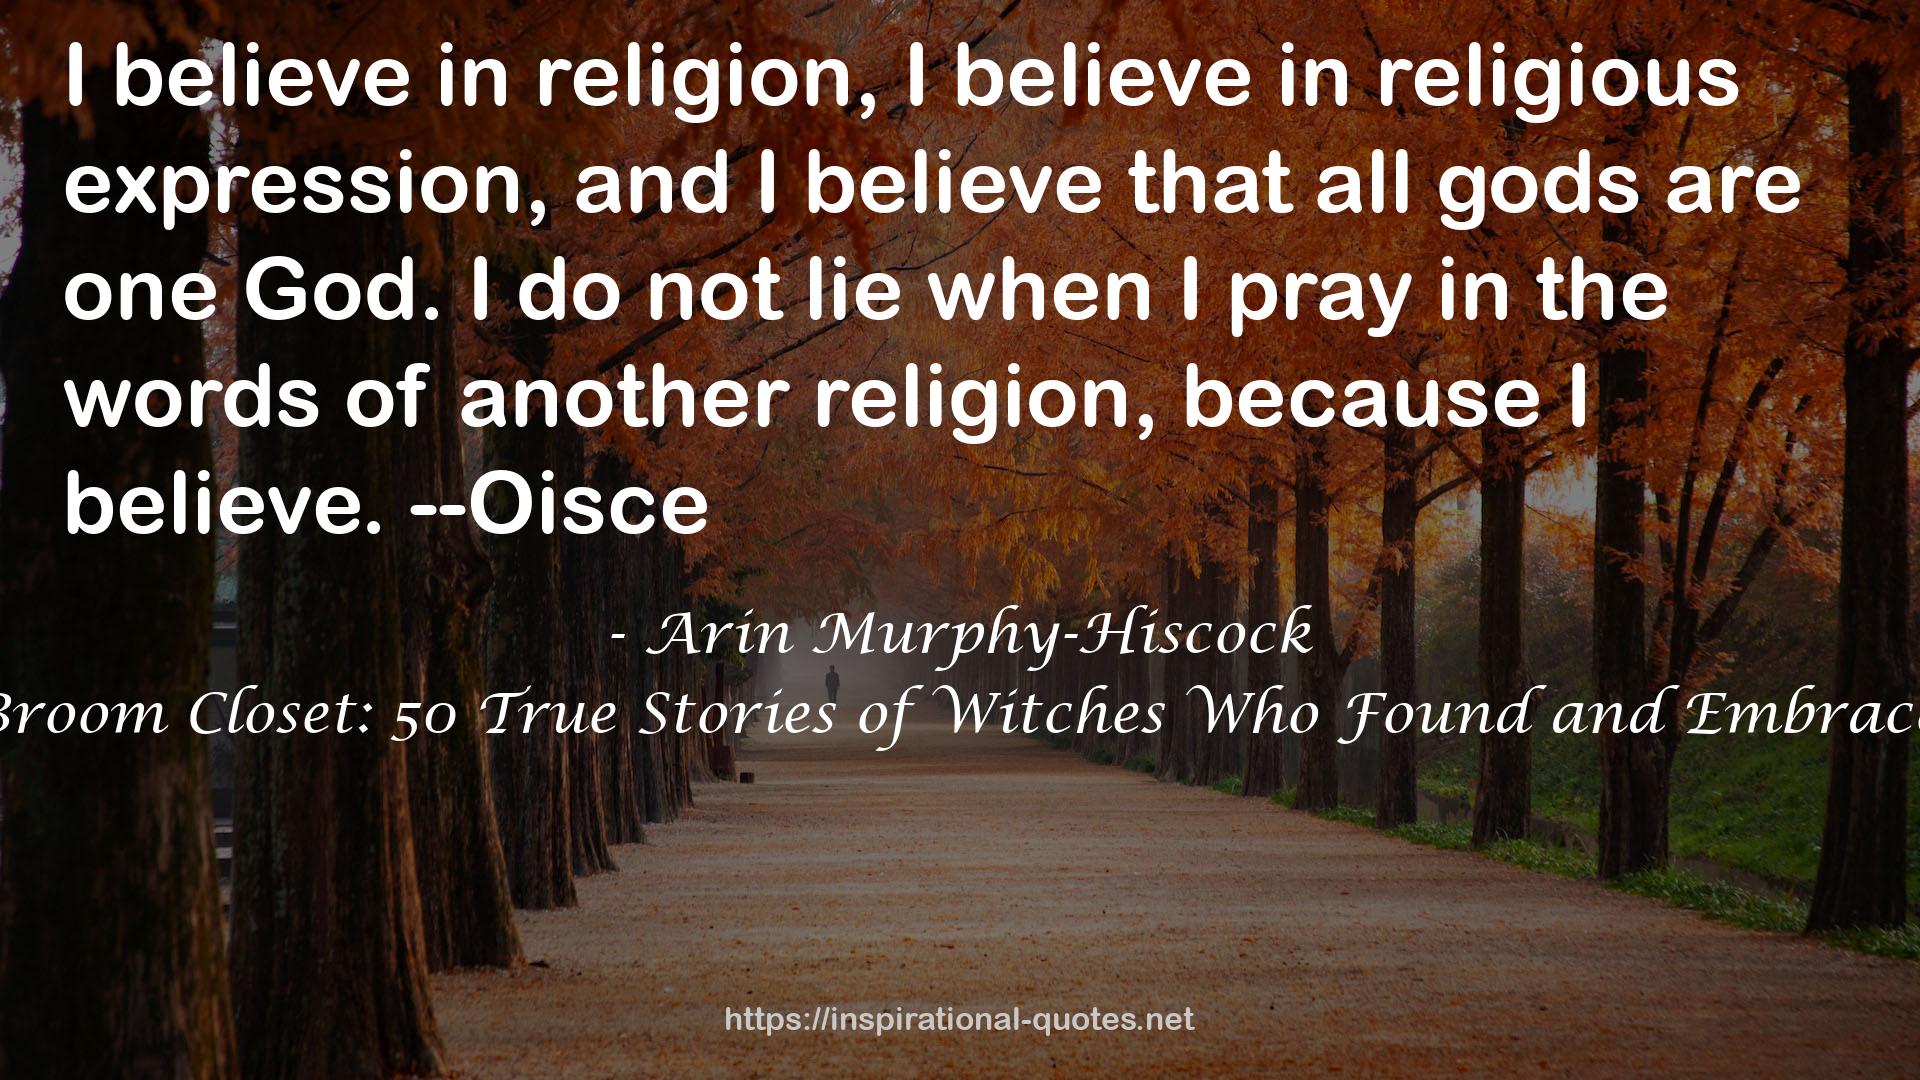 Out of the Broom Closet: 50 True Stories of Witches Who Found and Embraced the Craft QUOTES